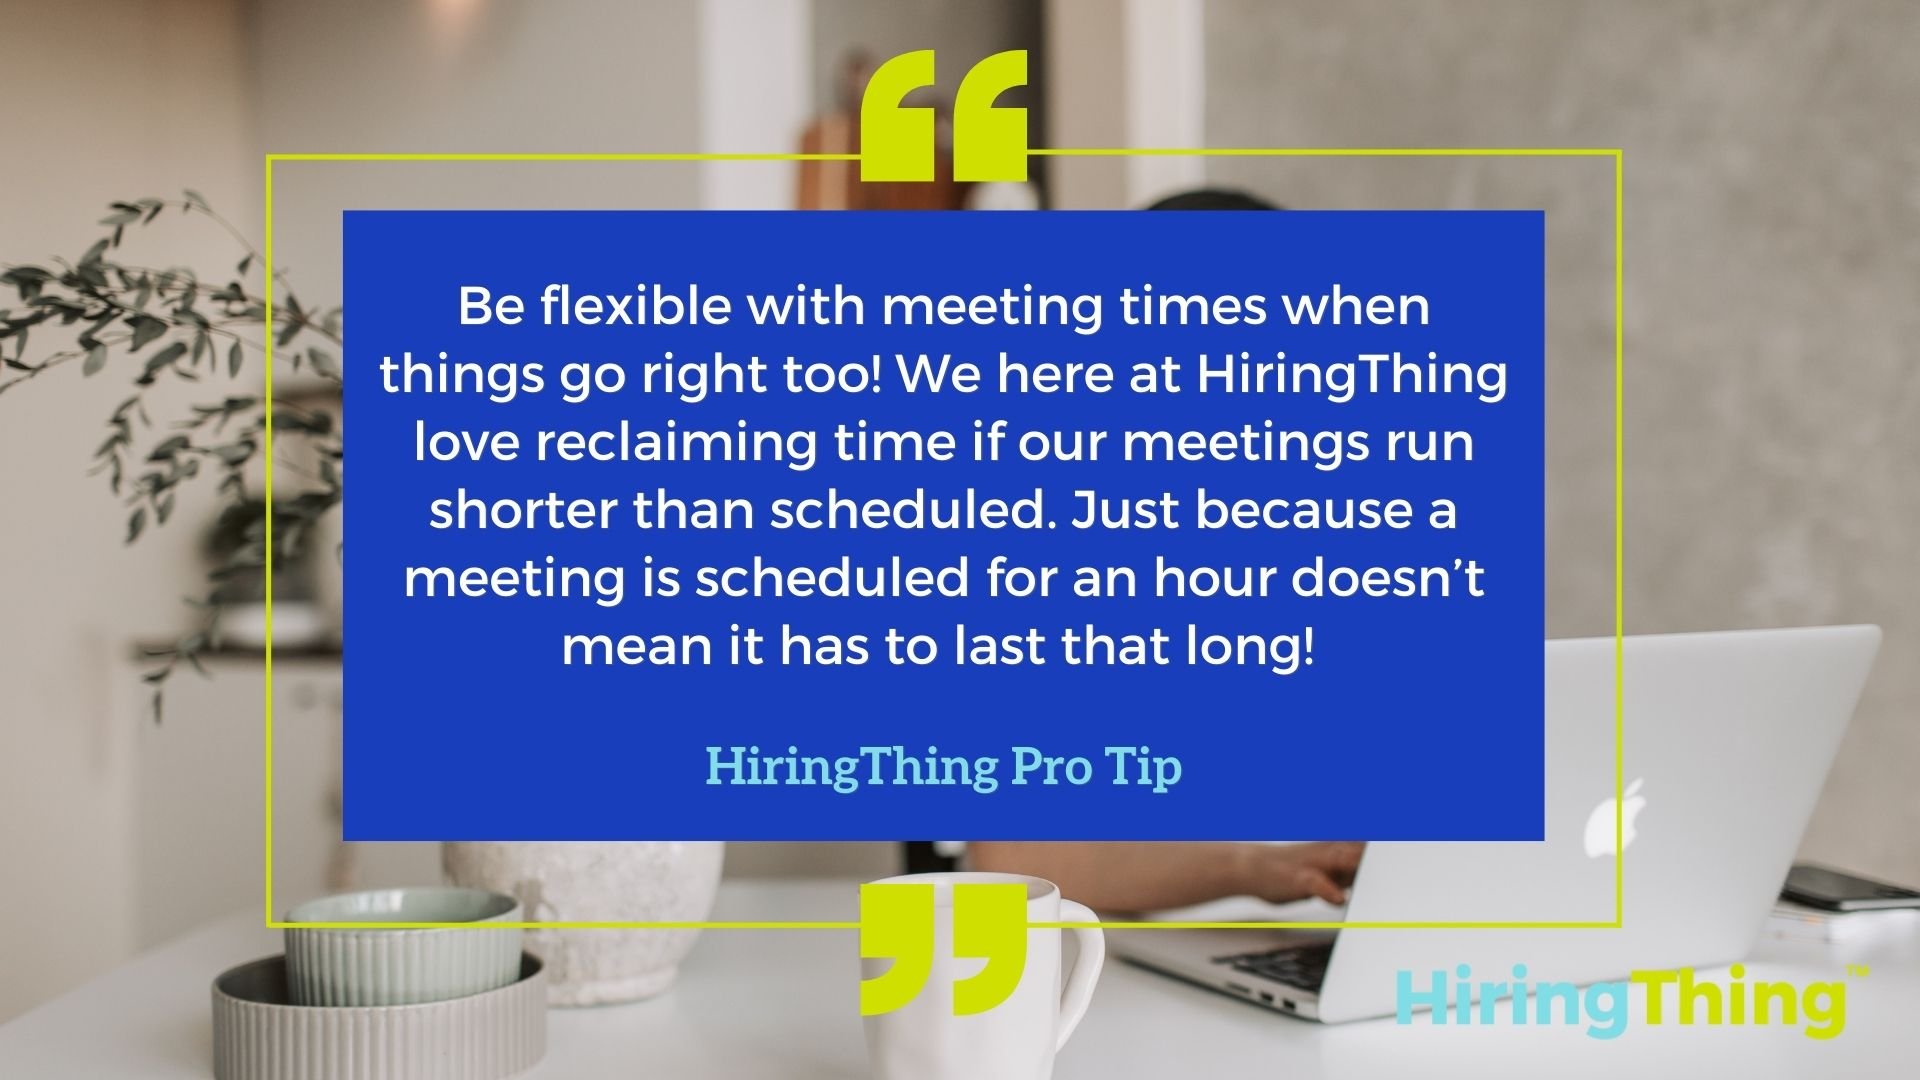 HiringThing Pro Tip: Be flexible with meeting times when things go right too! We here at HiringThing love reclaiming time if our meetings run shorter than scheduled. Just because a meeting is scheduled for an hour doesn’t mean it has to last that long! 